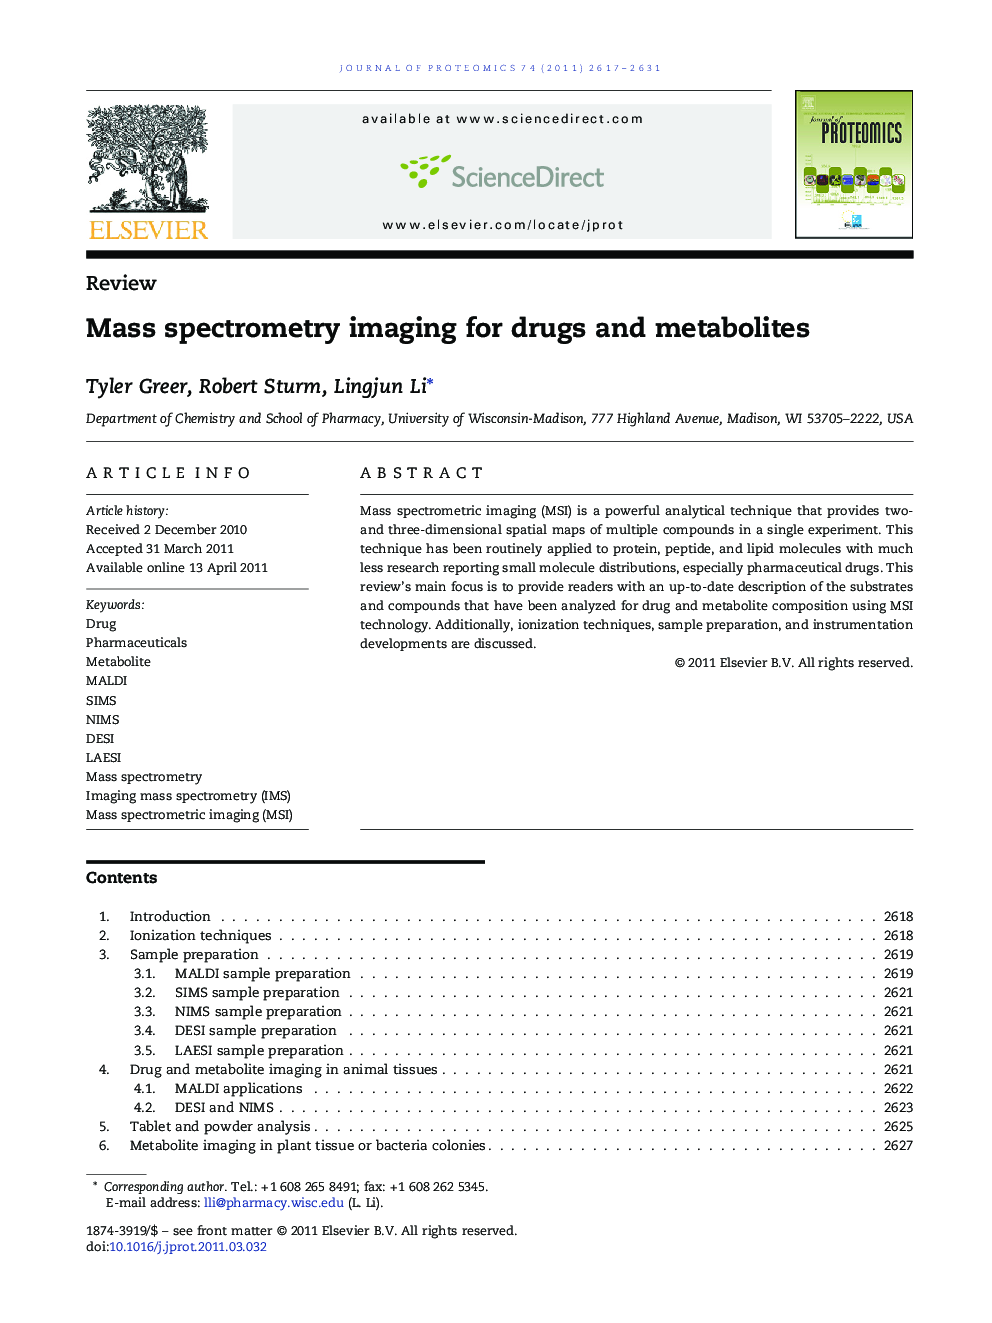 Mass spectrometry imaging for drugs and metabolites